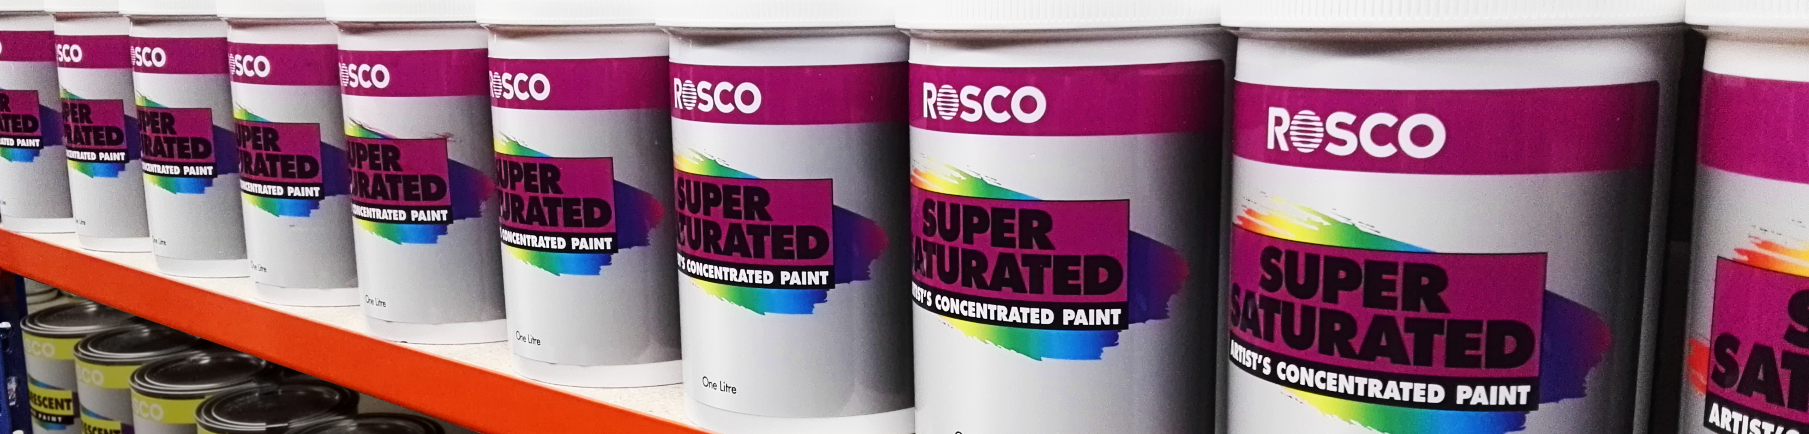 Rosco Supersaturated Paint